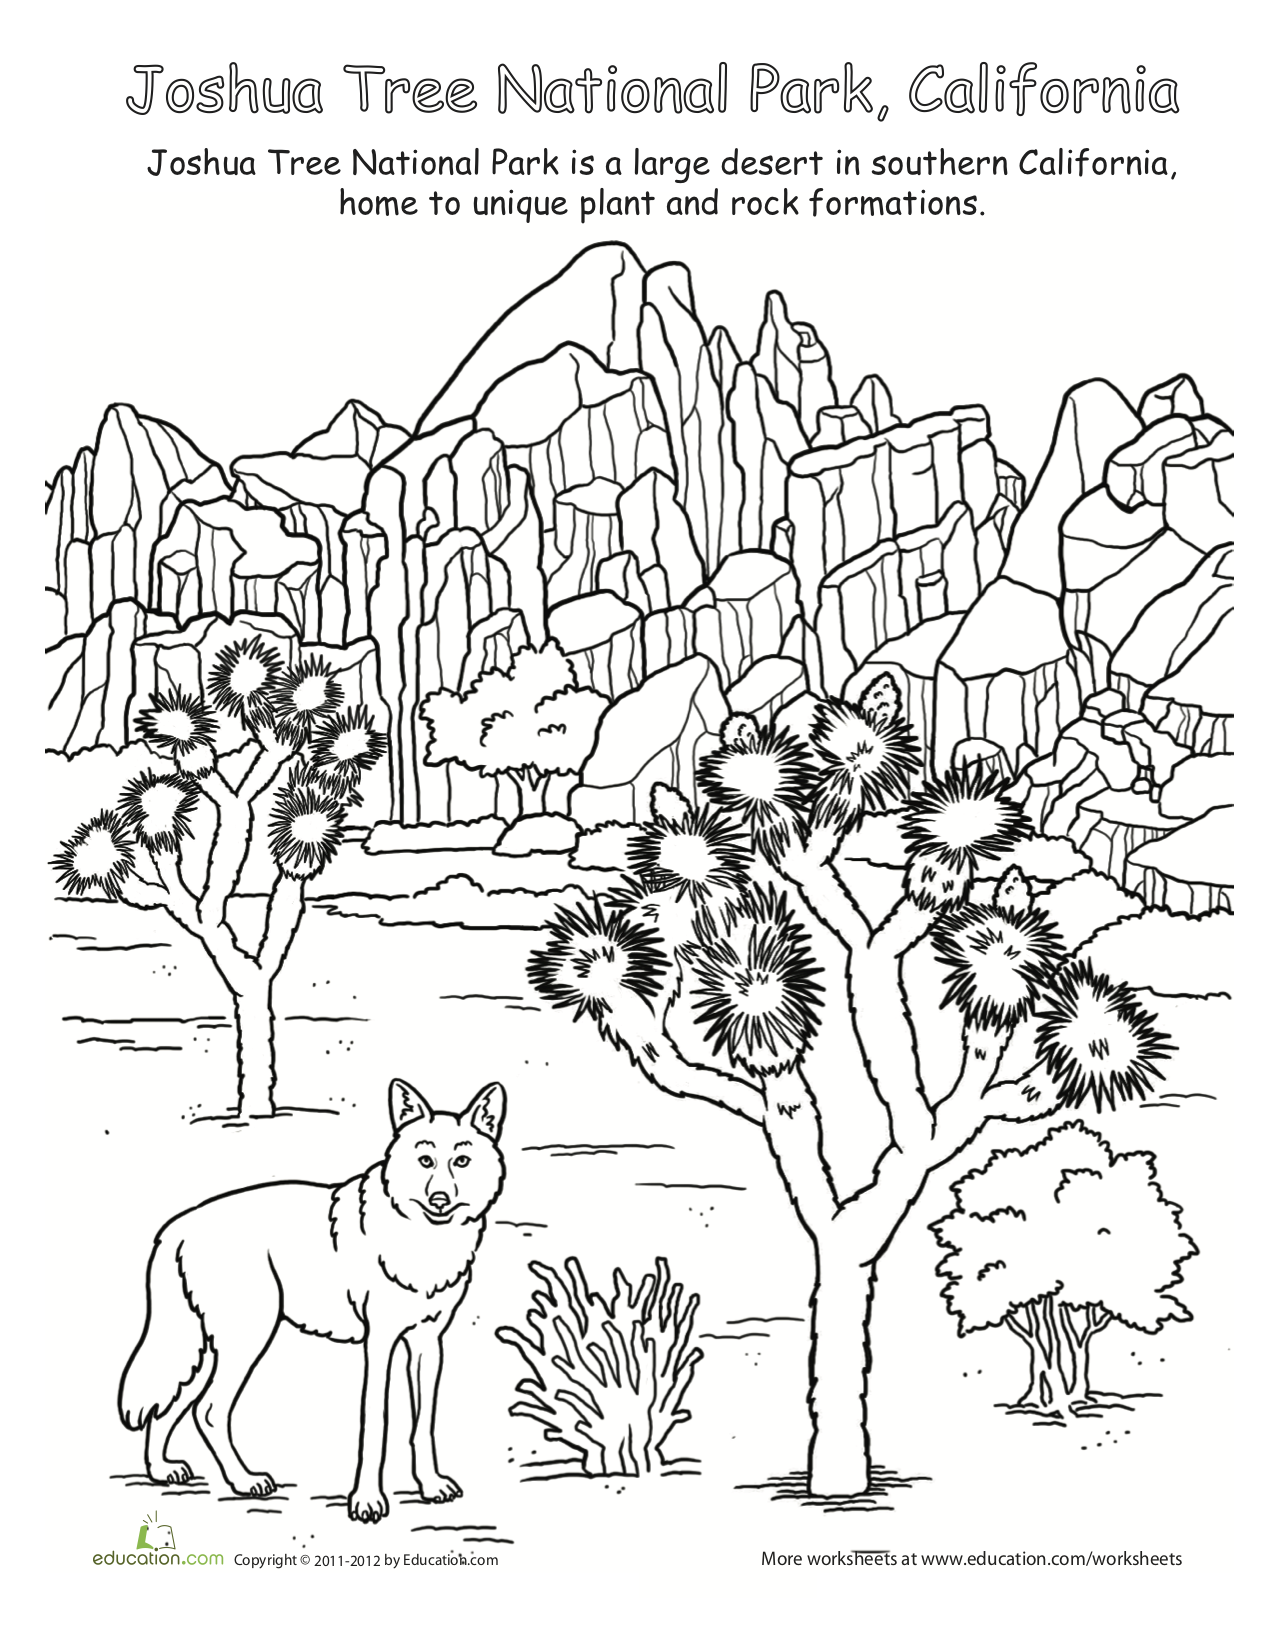 celebrate-picture-books-picure-book-review-joshua-tree-national-park-coloring-page